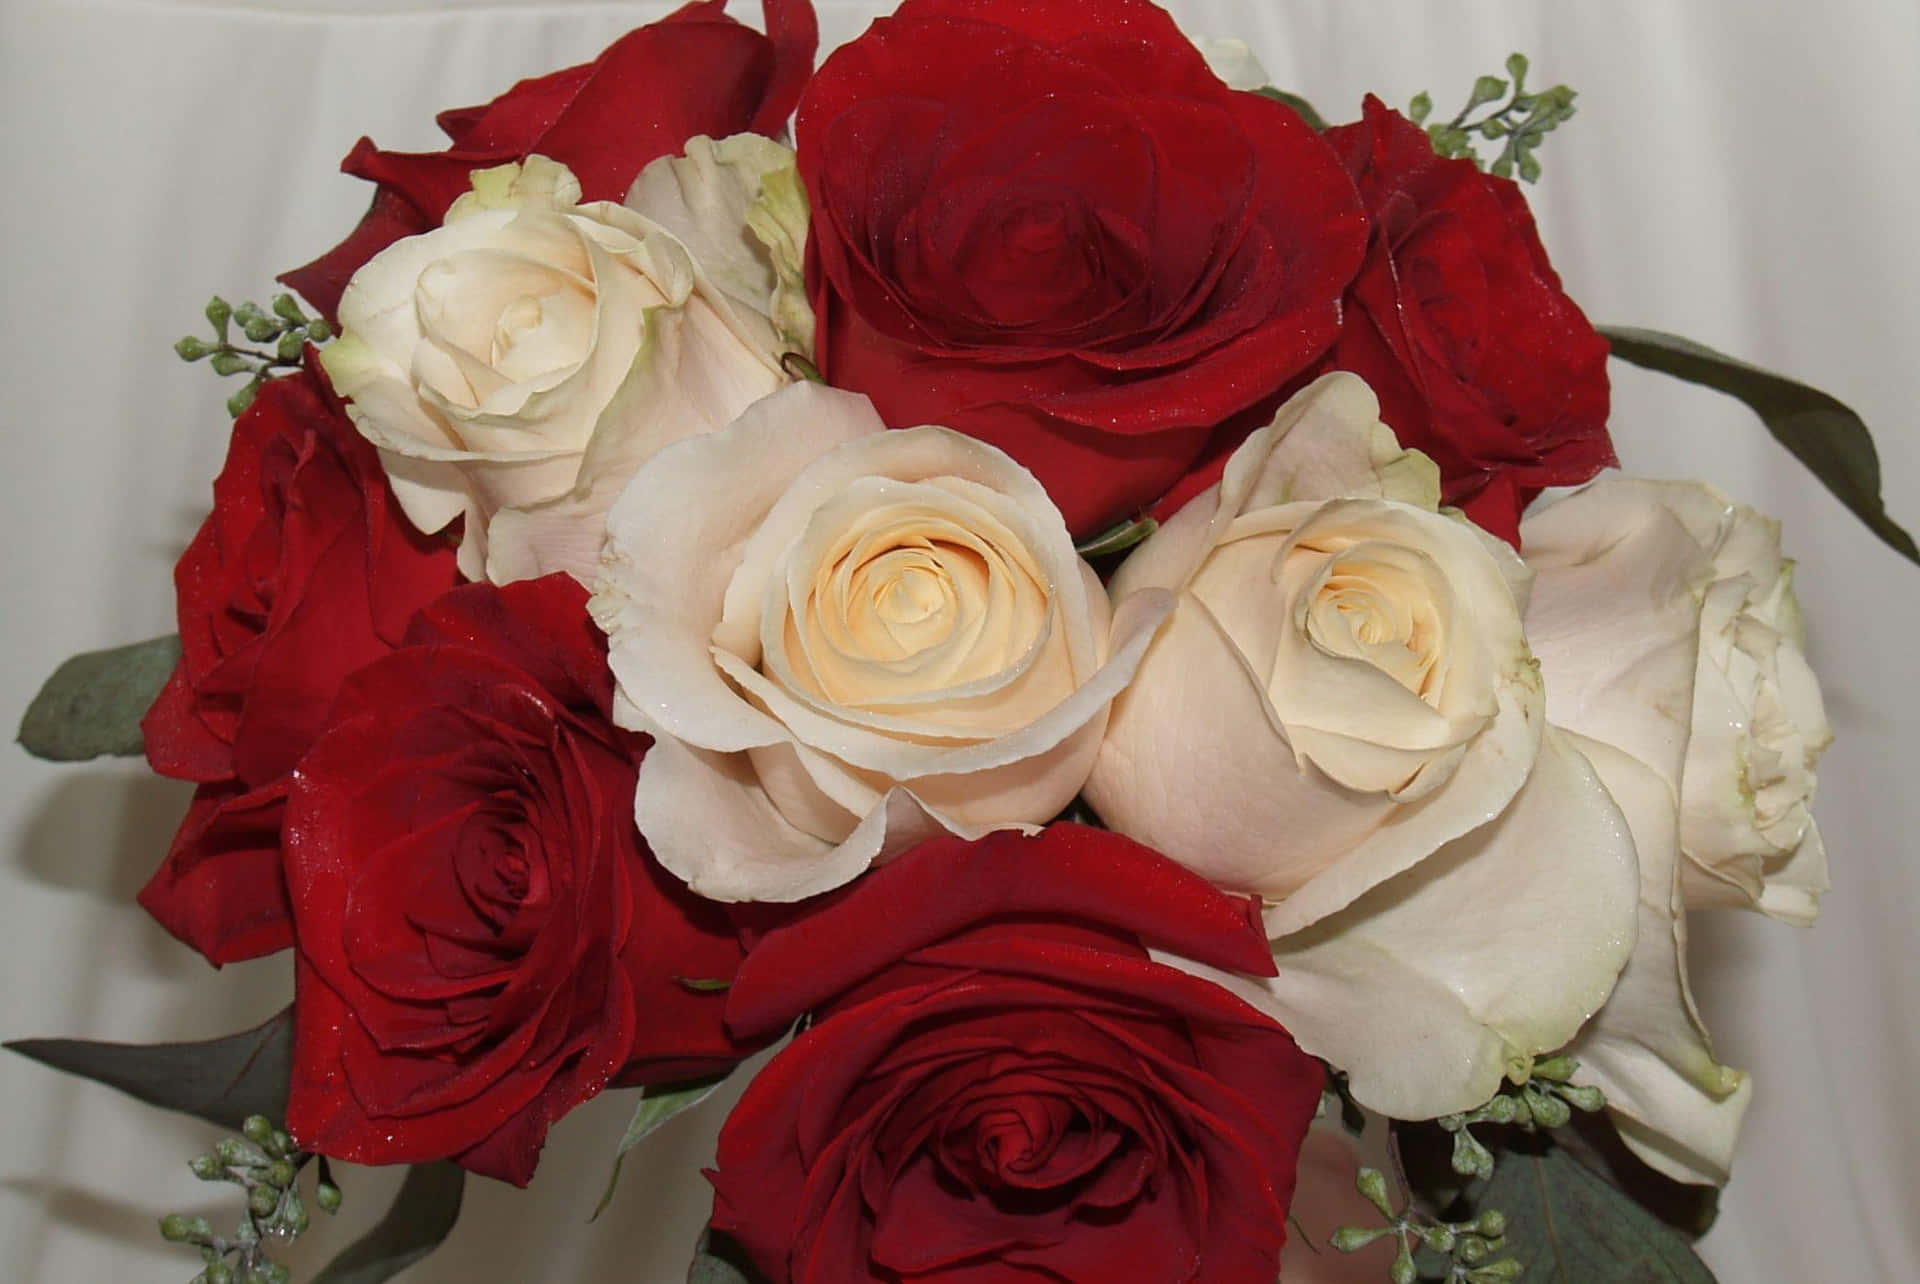 A Bouquet Of Red And White Roses